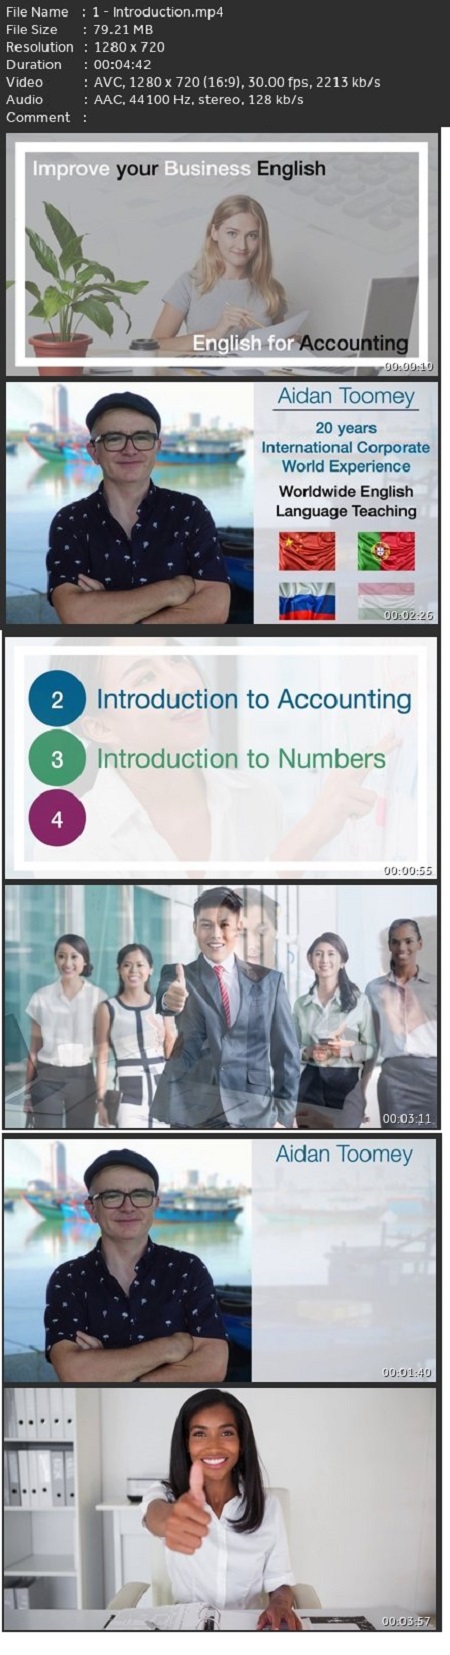 Improve Your Business English For Accounting & Finance Staff by Aidan Toomey